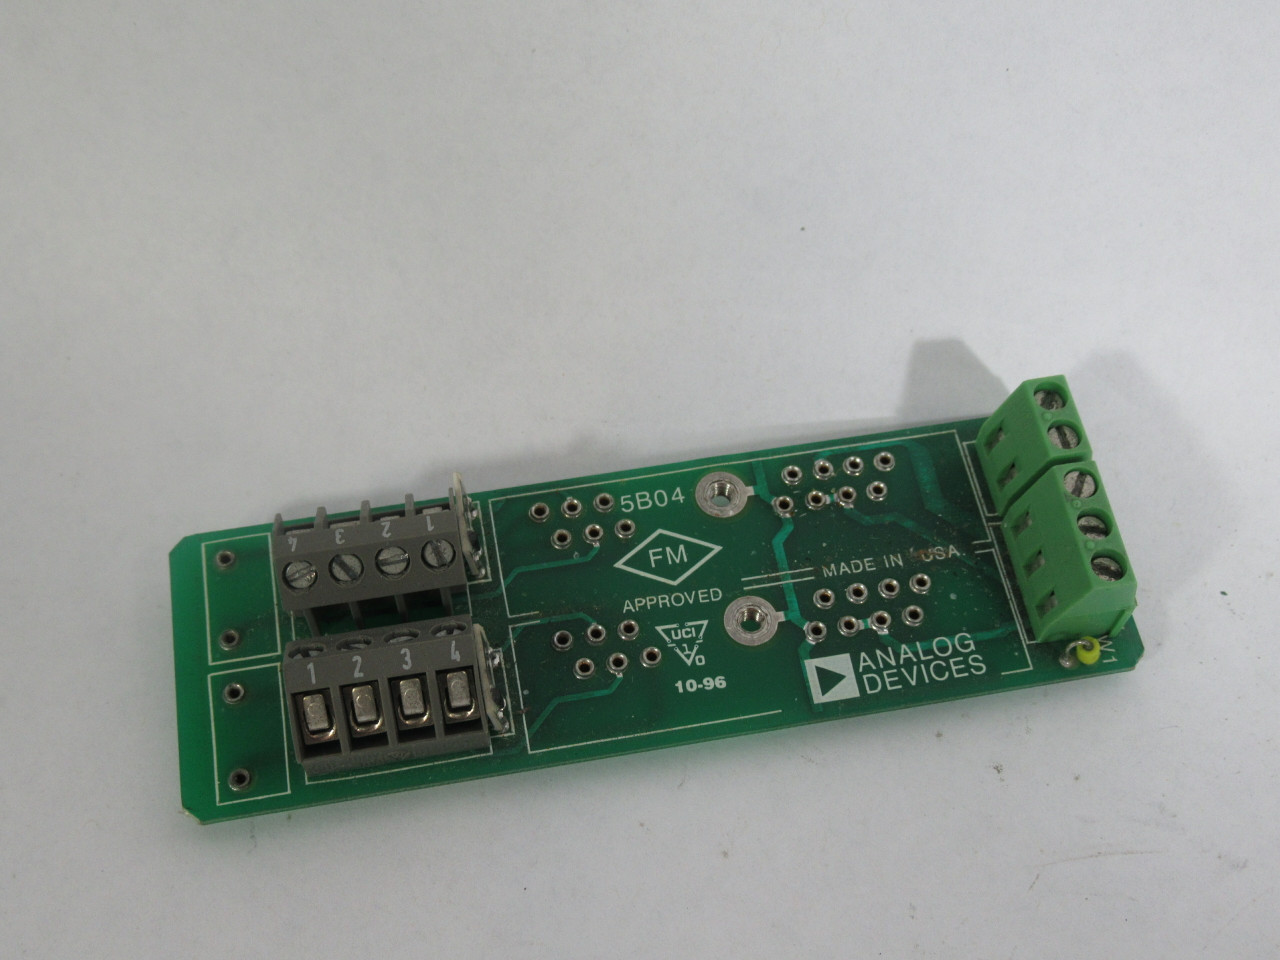 Analog Devices 71-1263503 Analog Relay Board USED